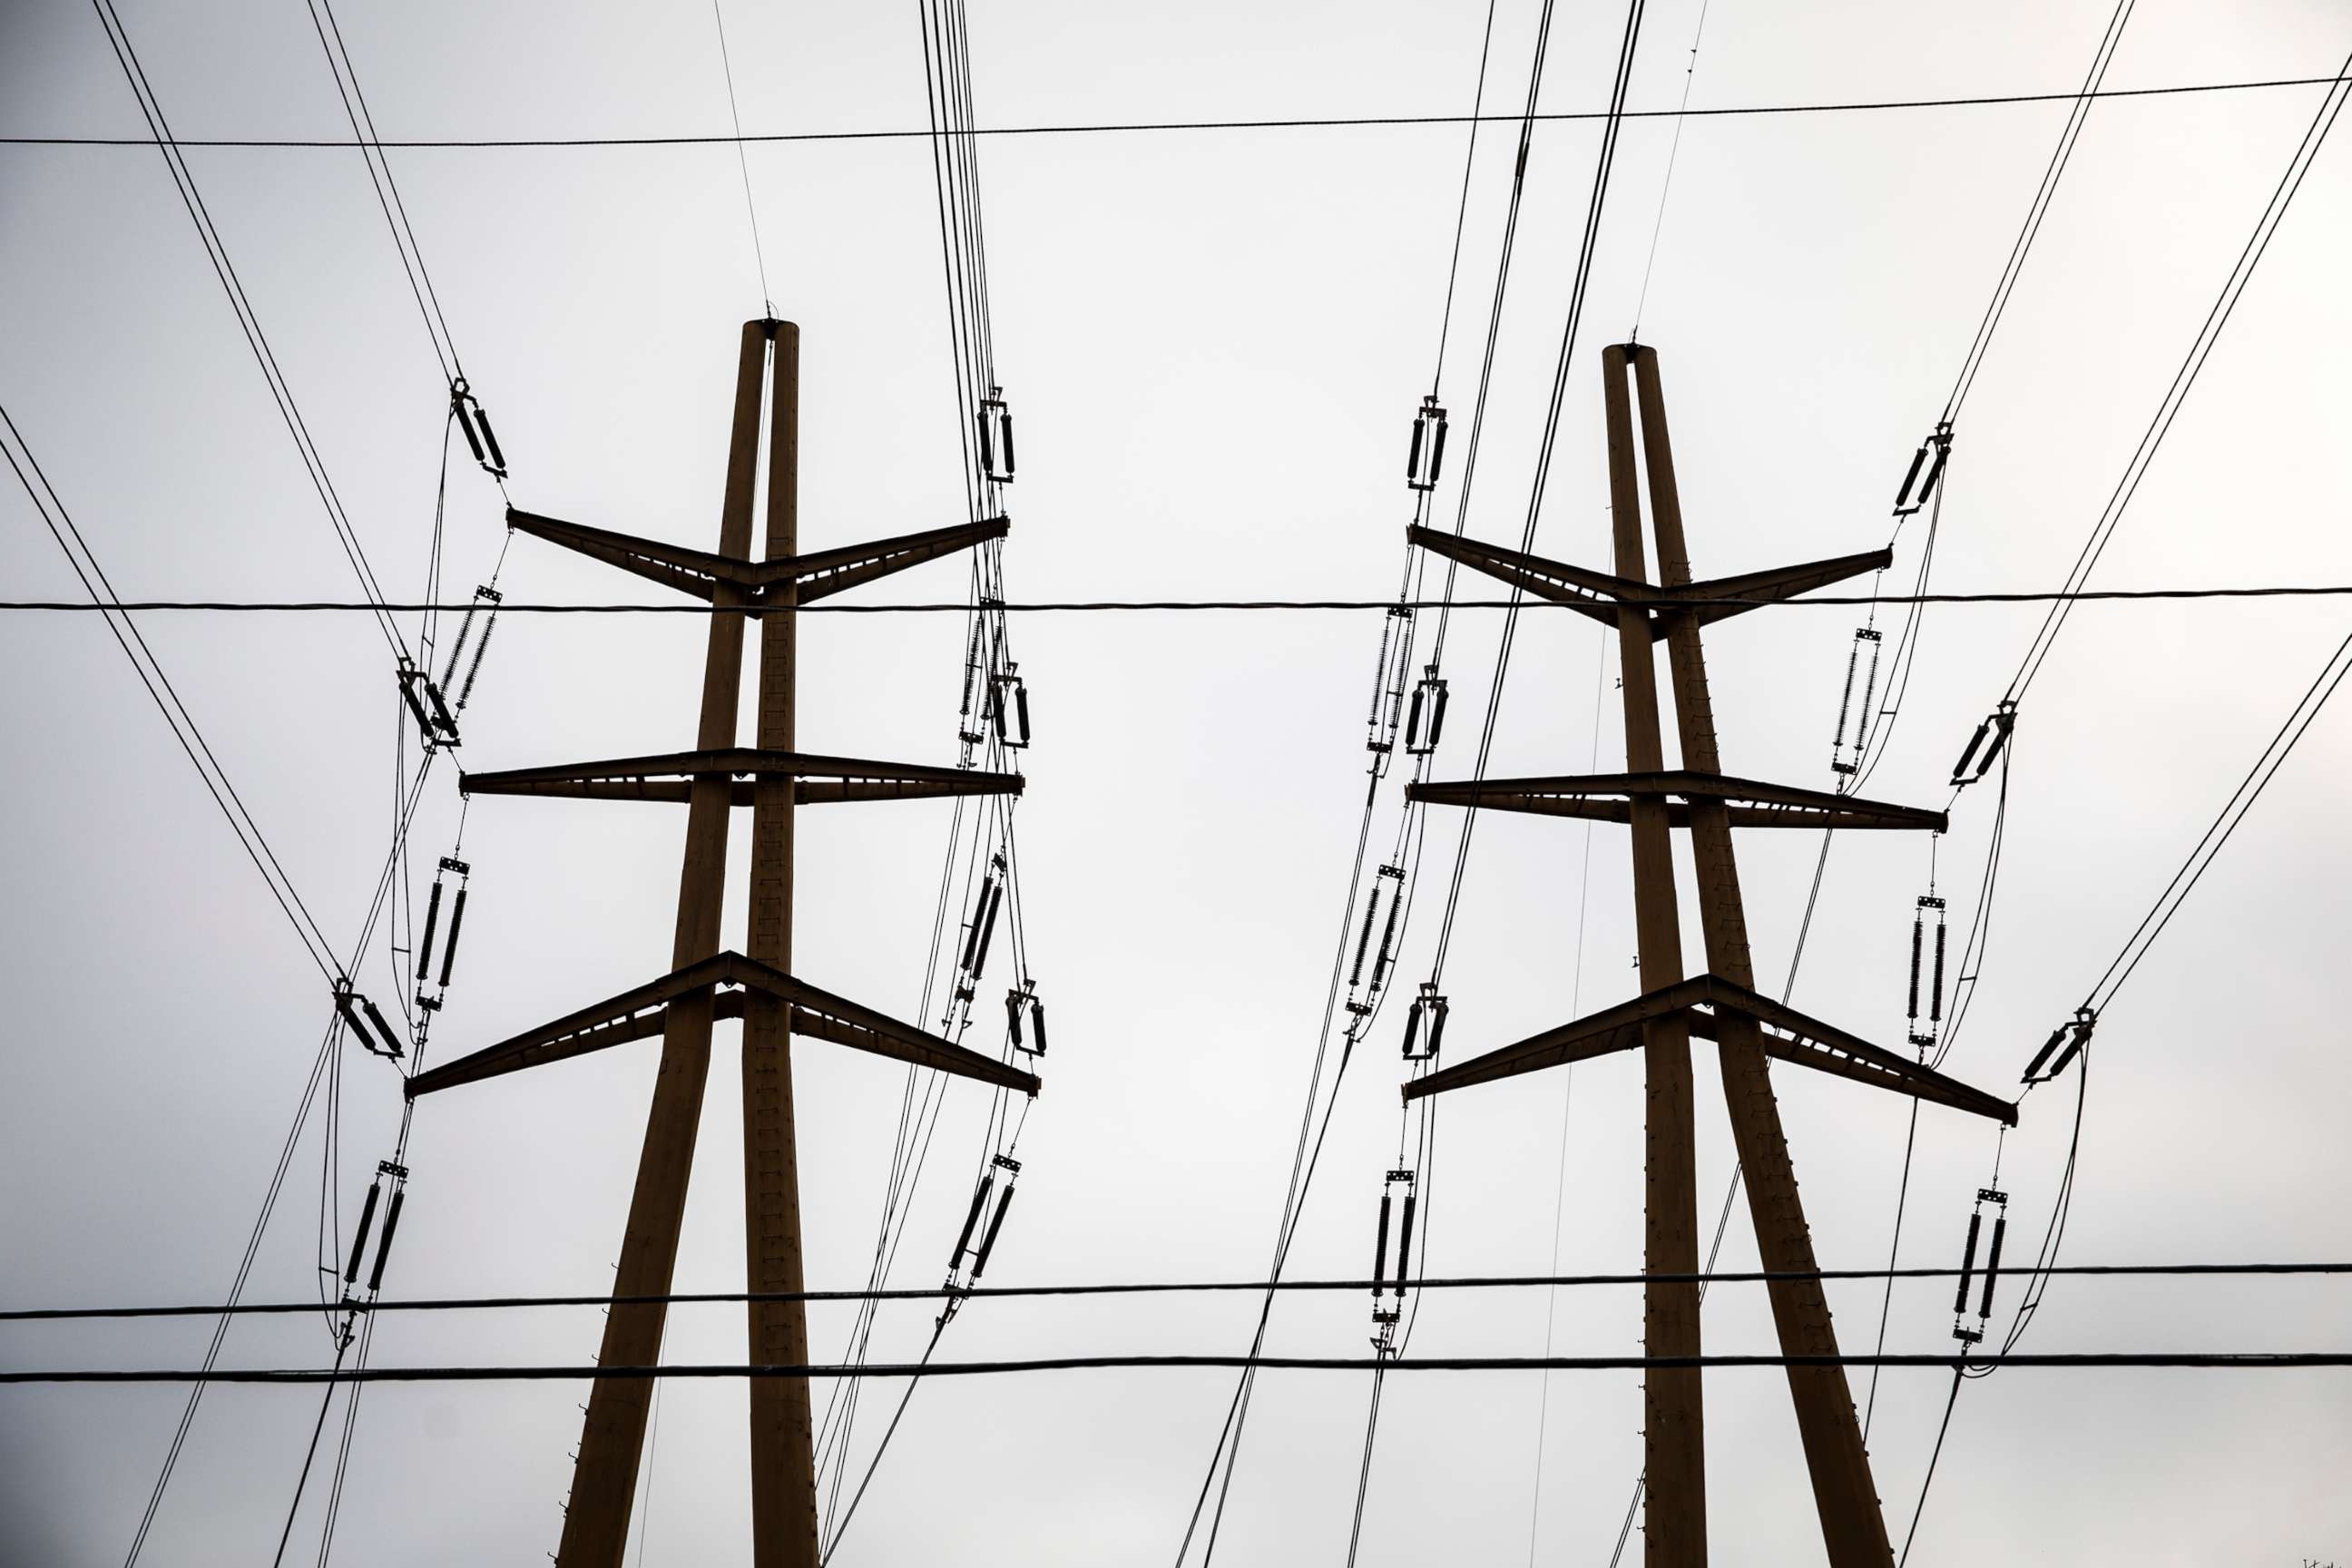 PHOTO: Electric power lines in Hermosa Beach, Calif., July 13, 2021.